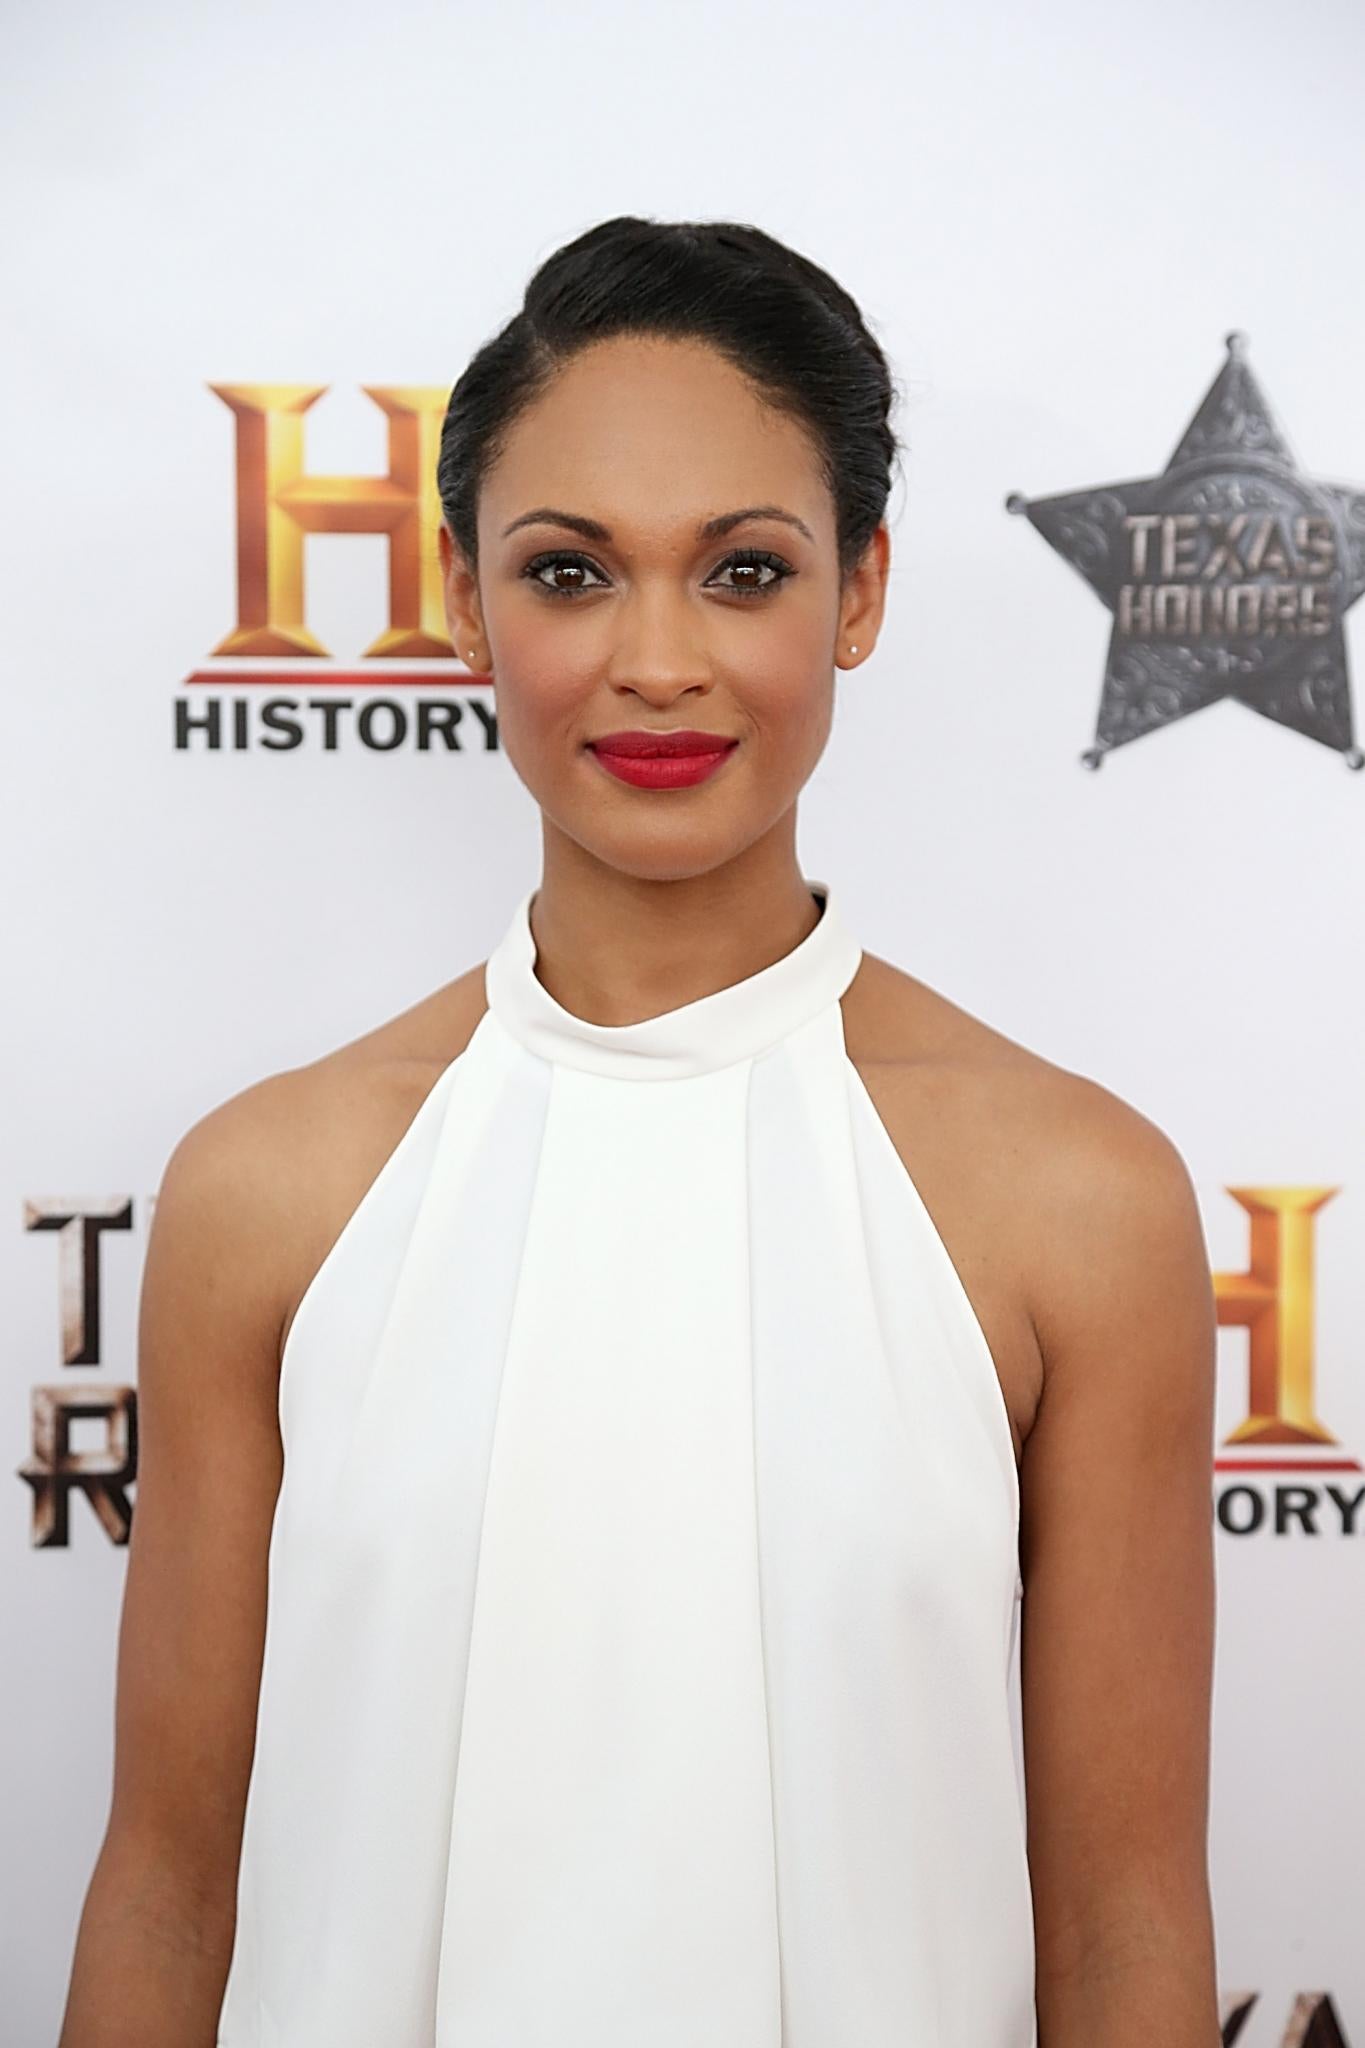 7 Things To Know About 'Texas Rising' Star Cynthia Addai-Robinson